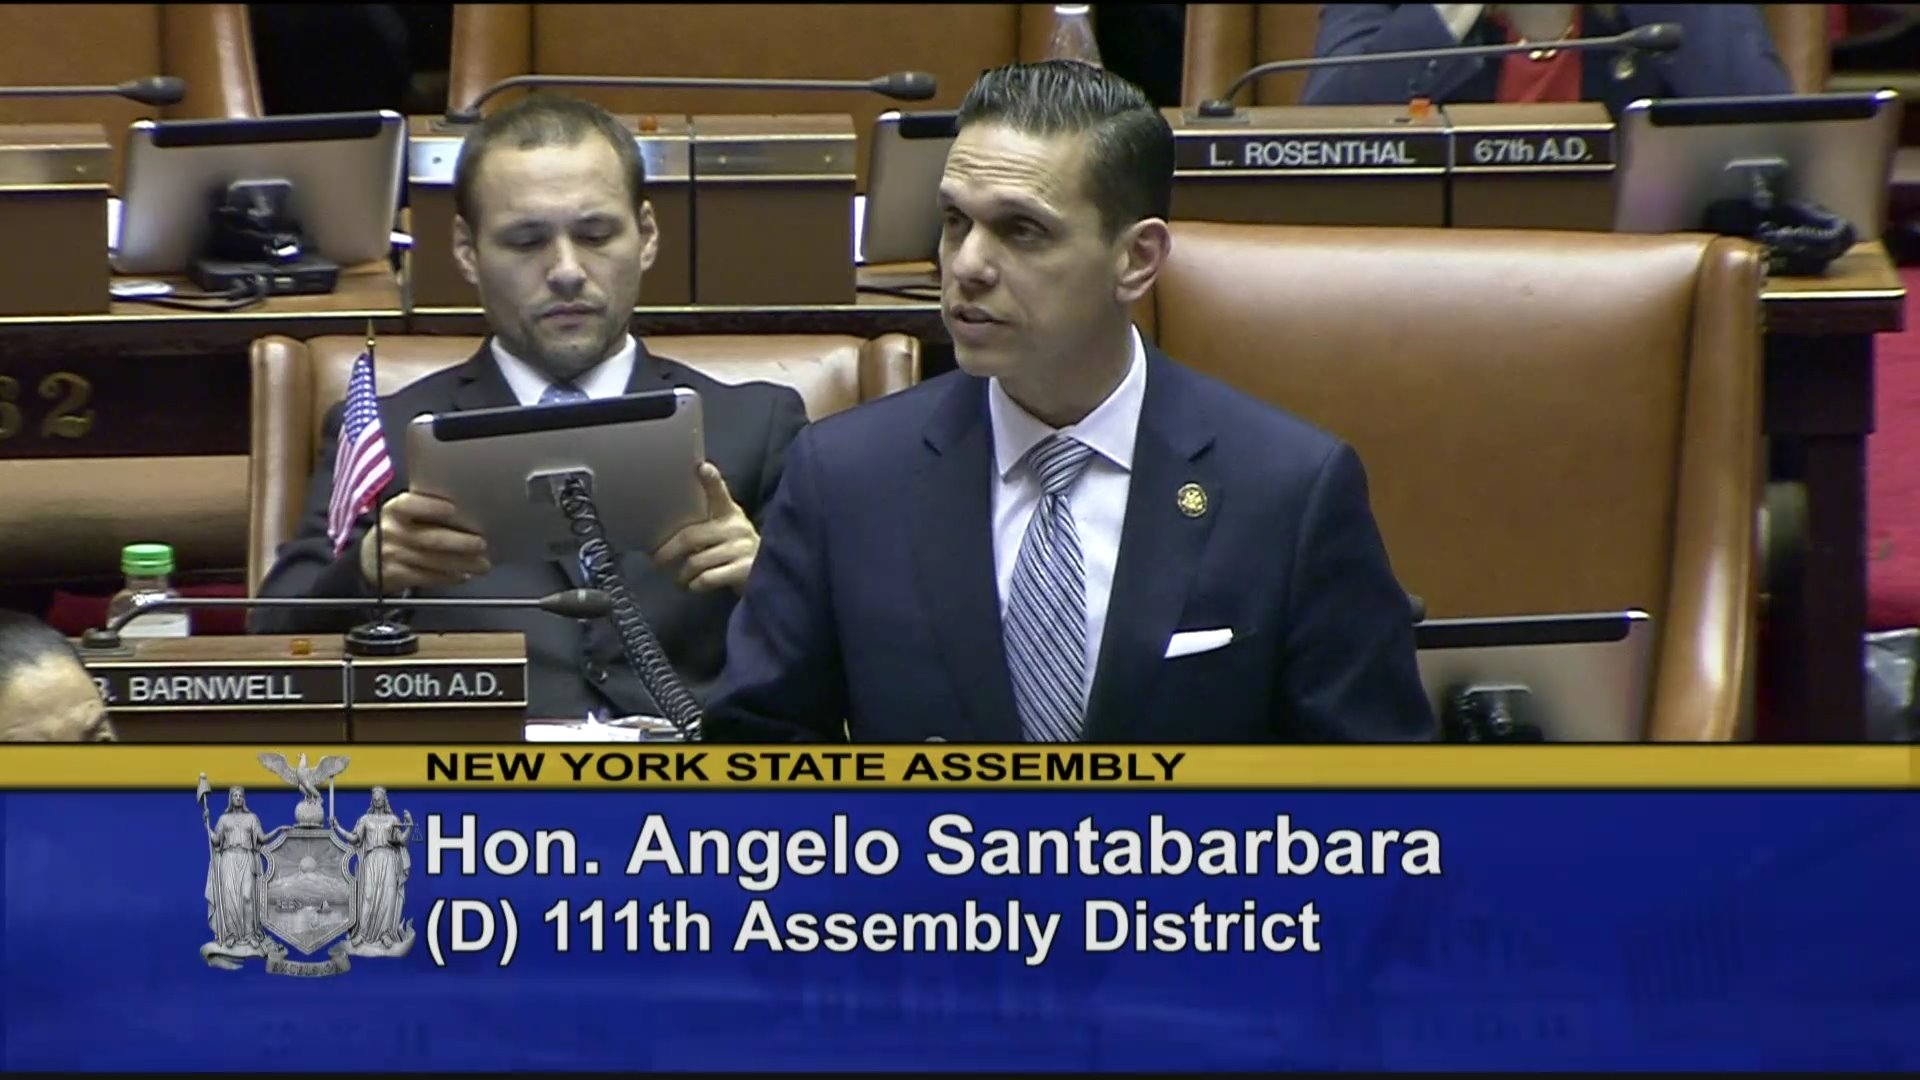 Santabarbara Speaks on Continued Investments in Infrastructure